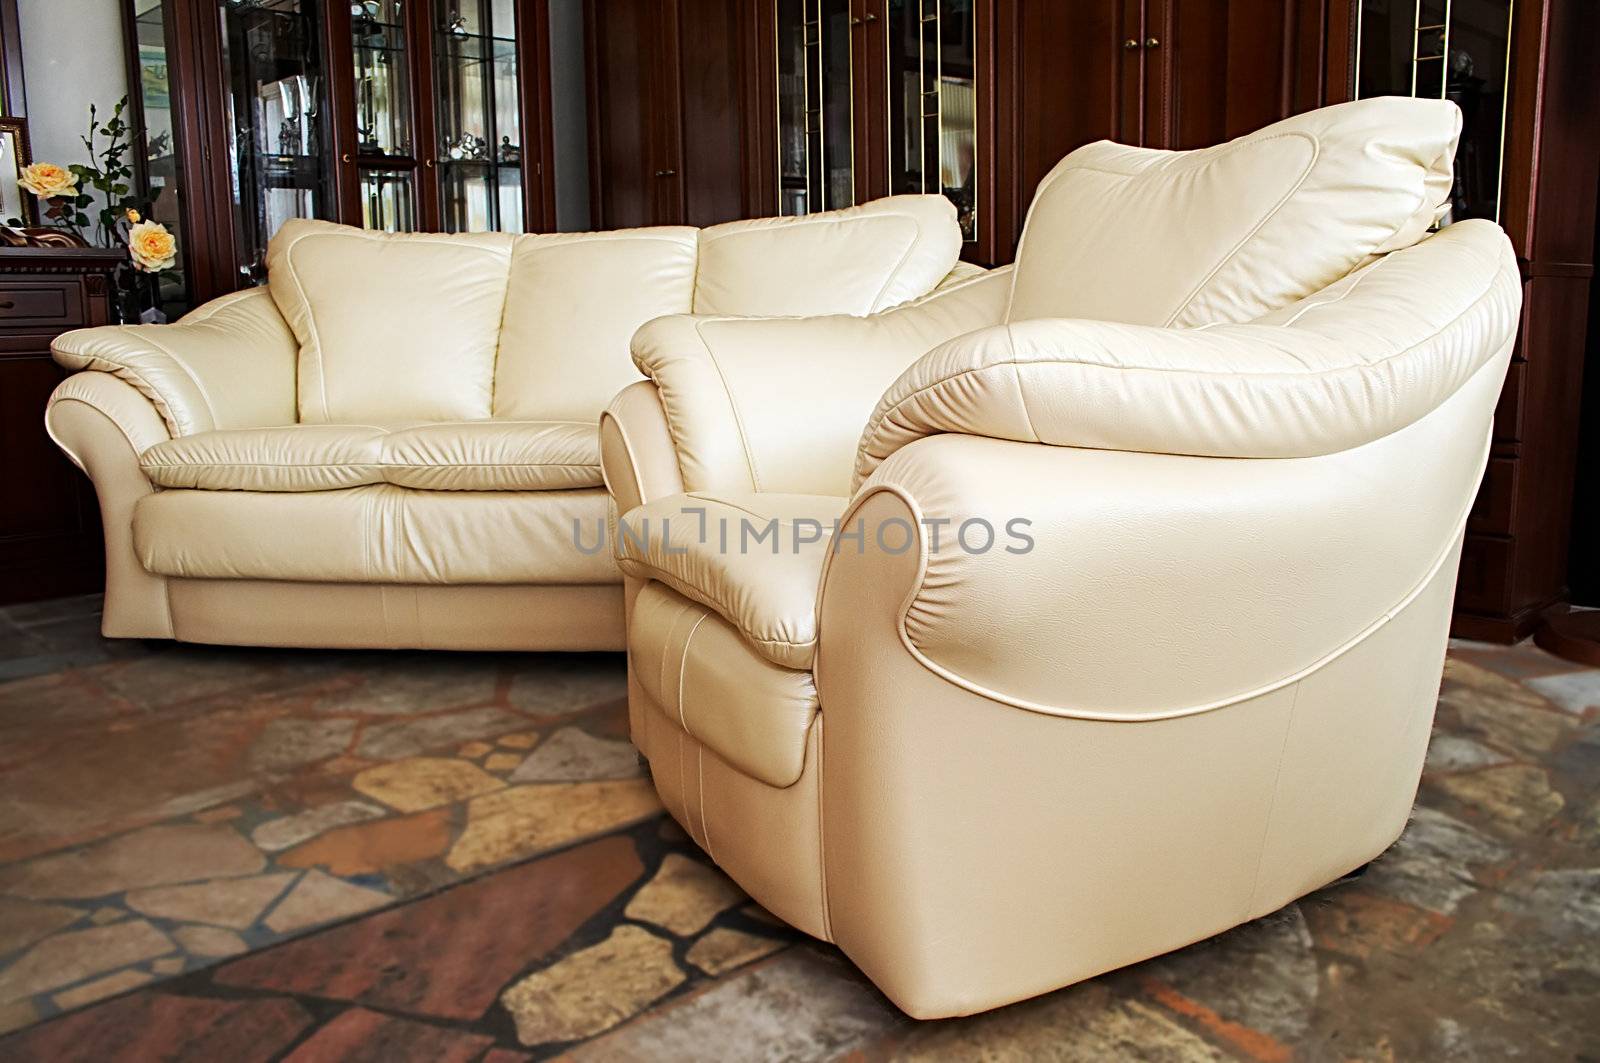 white sofa and armchair by terex